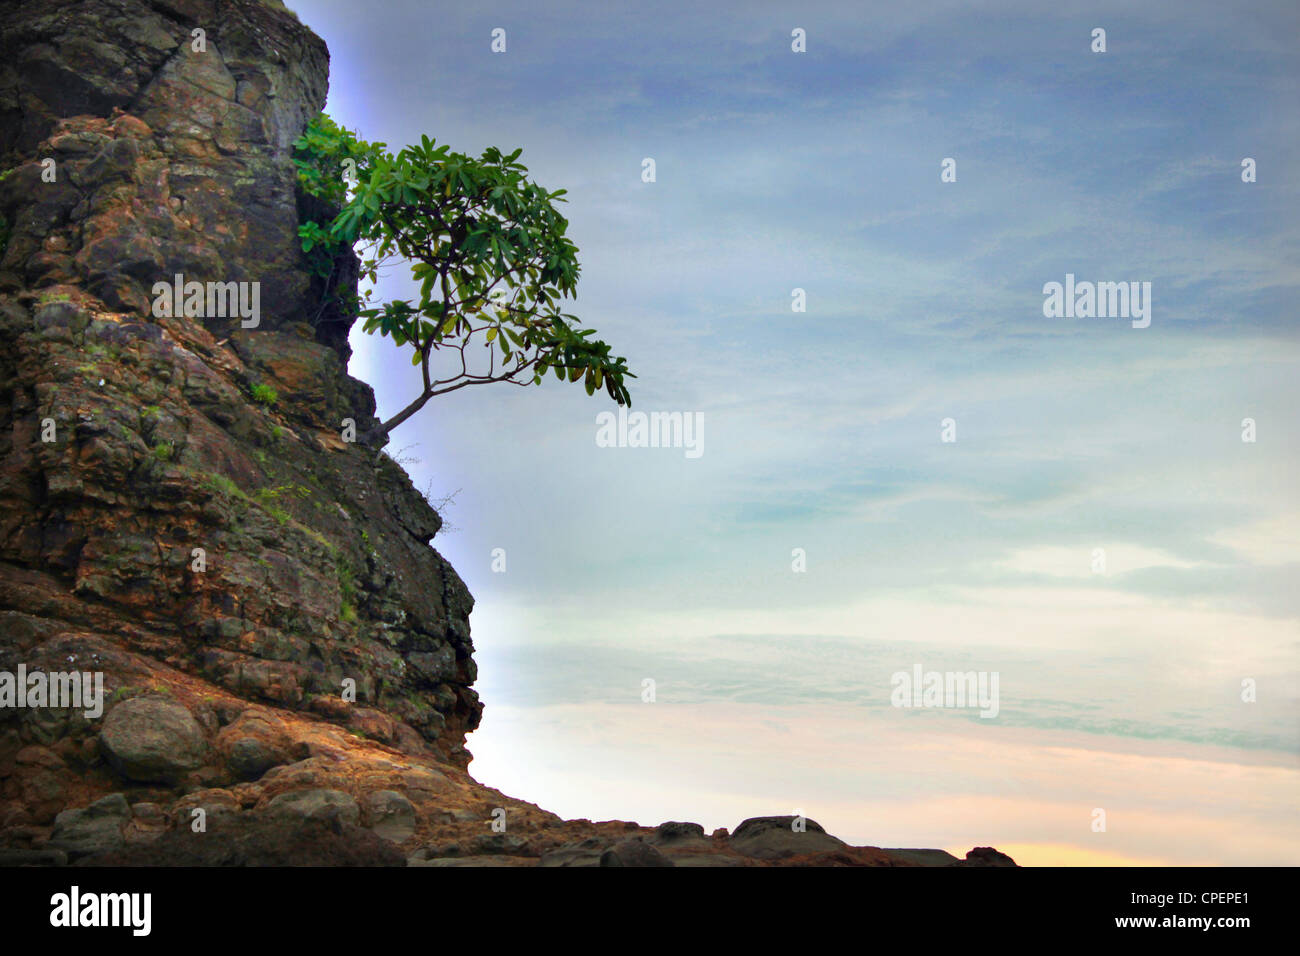 Stark afternoon scene of of lone gnarled tree protruding from rocky cliff in San Juan del Sur, Nicaragua Stock Photo